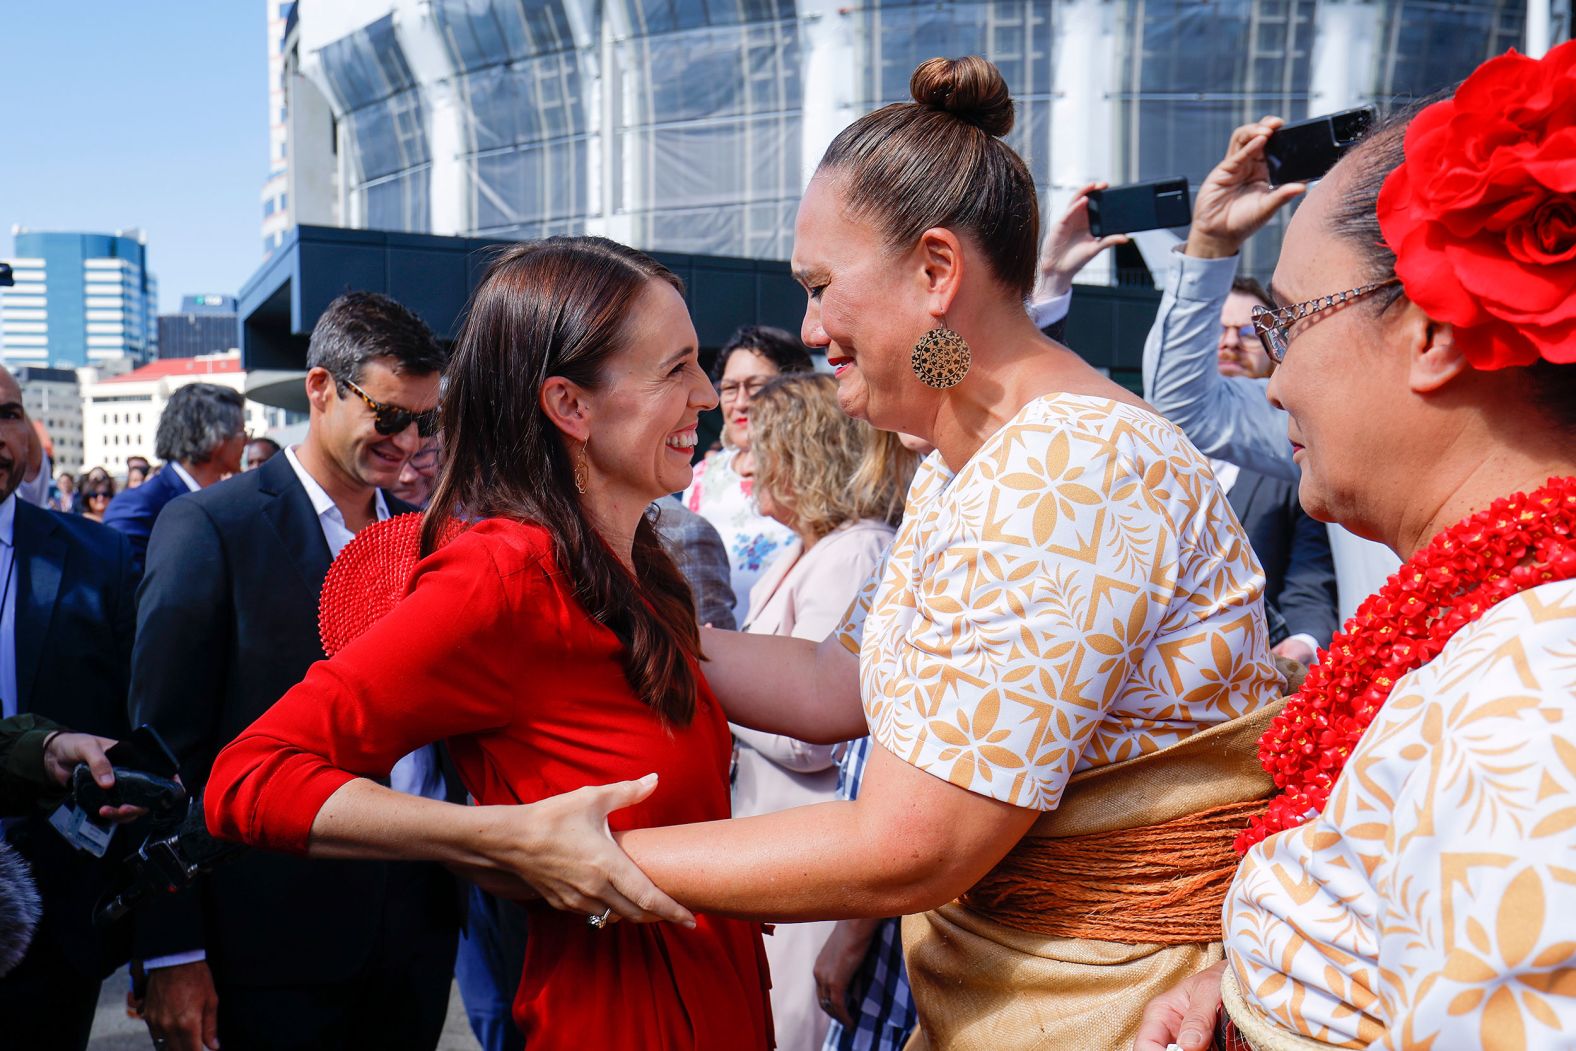 New Zealand Prime Minister Jacinda Ardern, left, hugs incoming Deputy Prime Minister Carmel Sepuloni as she leaves Parliament for the last time on Wednesday, January 25. Ardern announced her resignation last week, and <a href="index.php?page=&url=https%3A%2F%2Fwww.cnn.com%2F2023%2F01%2F24%2Faustralia%2Fjacinda-ardern-chris-hipkins-new-zealand-intl-hnk%2Findex.html" target="_blank">Chris Hipkins was sworn in as her successor</a>.